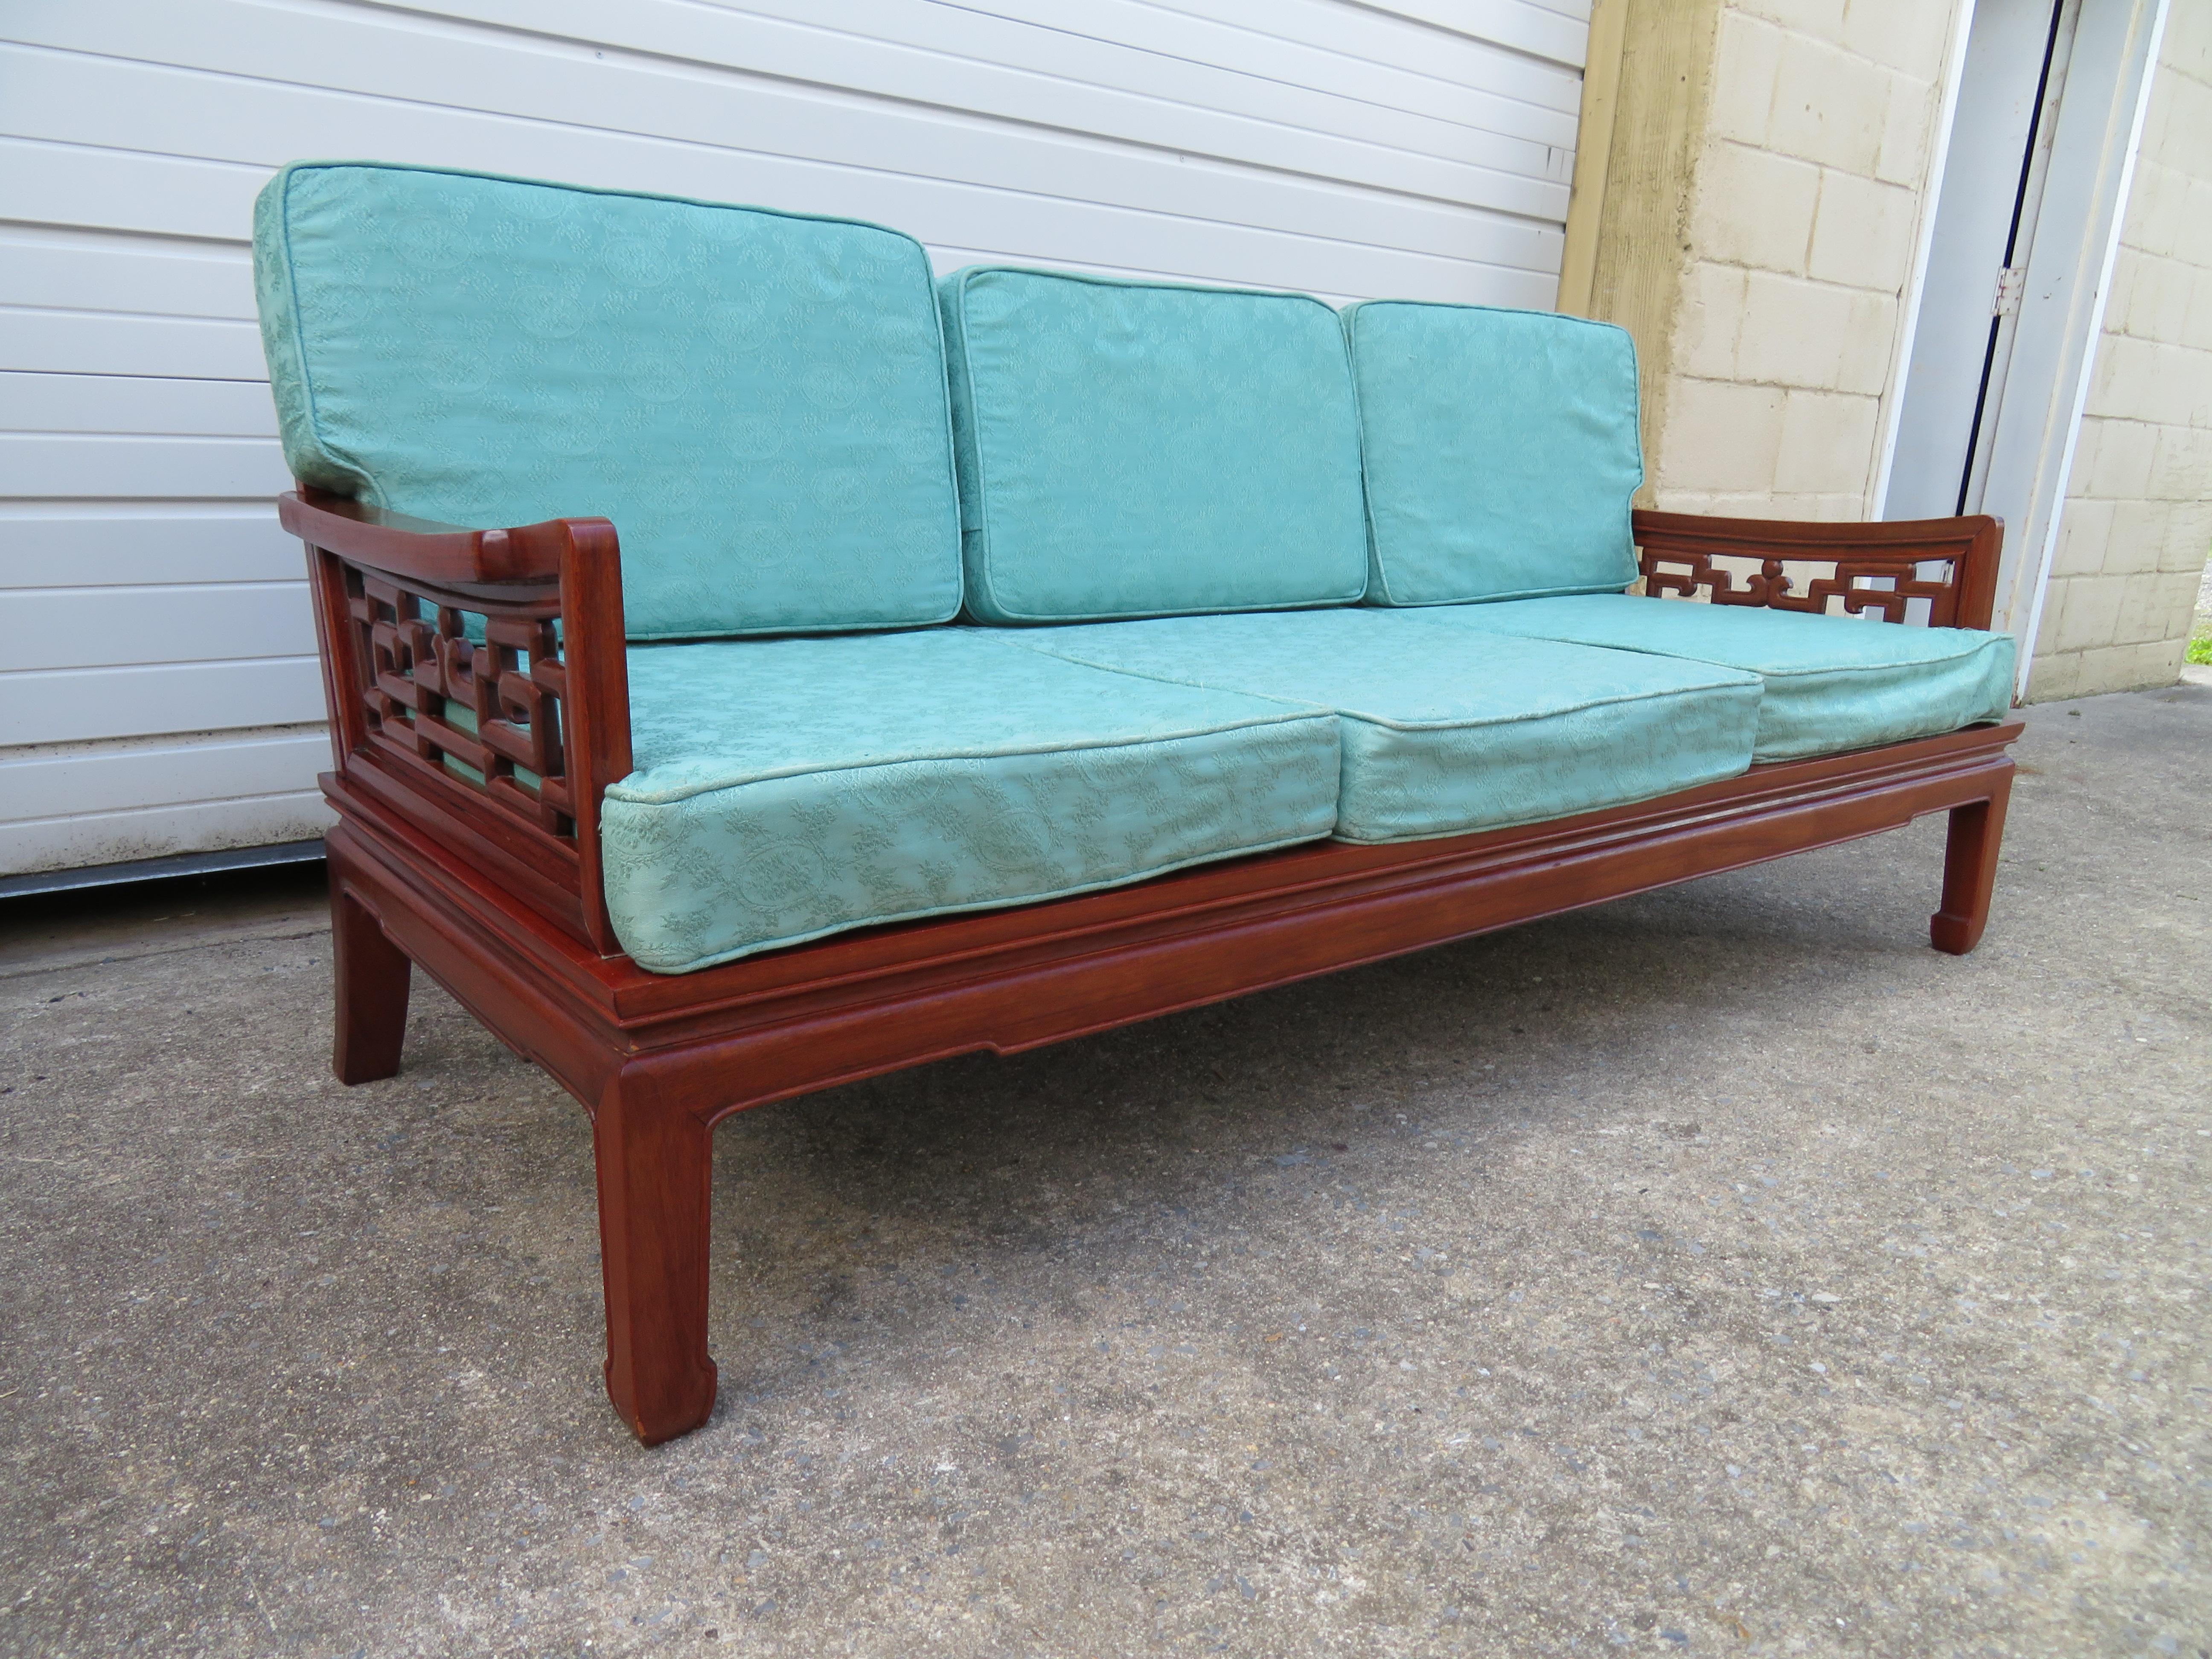 Exquisite Chinese carved rosewood sofa made in the classic Ming style. Featuring a geometric carved back and arms and chow legs. The seat pads are original and are still comfortable-re-upholstery is recommended.